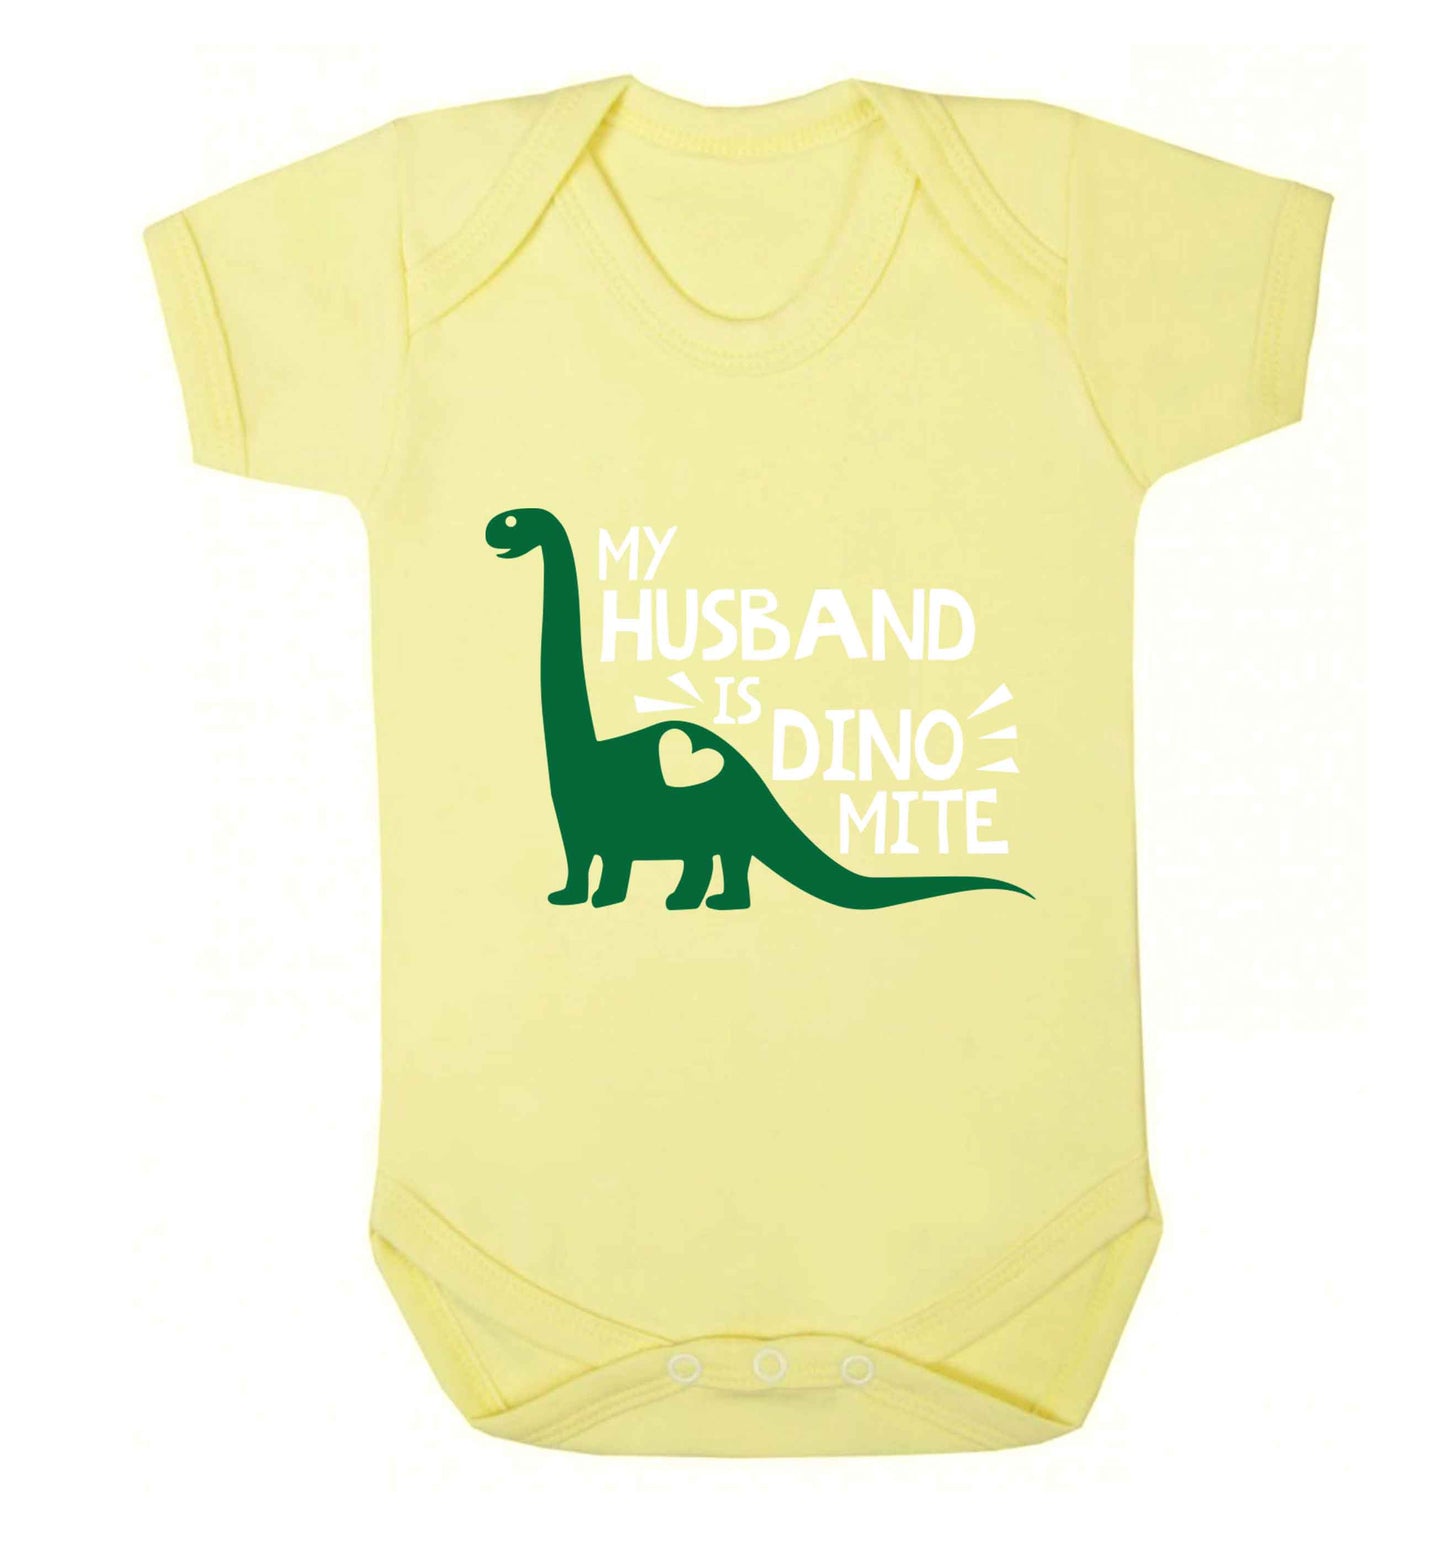 My husband is dinomite! Baby Vest pale yellow 18-24 months